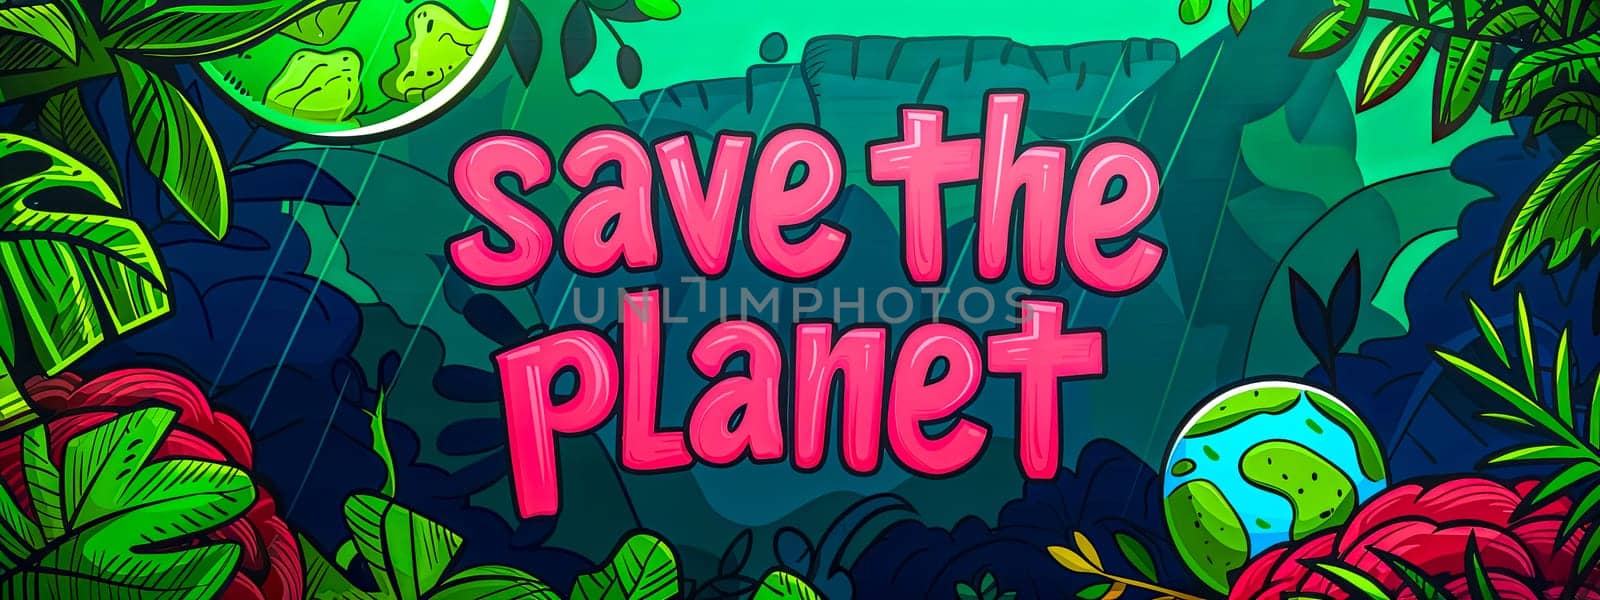 Vibrant save the planet environmental banner by Edophoto